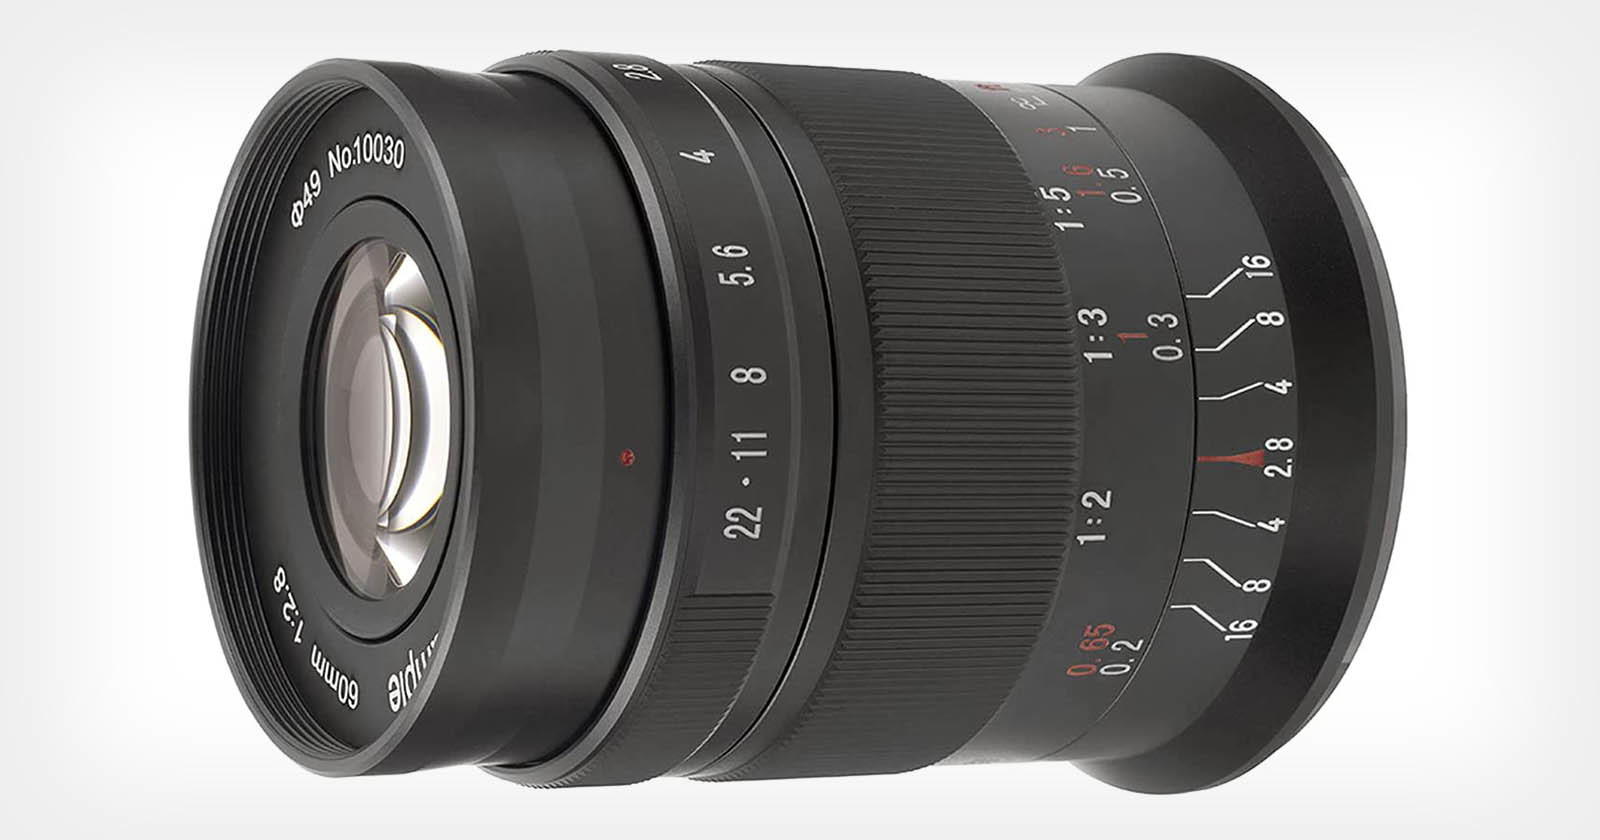 7artisans 60mm f/2.8 Macro II APS-C Review: A Good Lens for Its Price